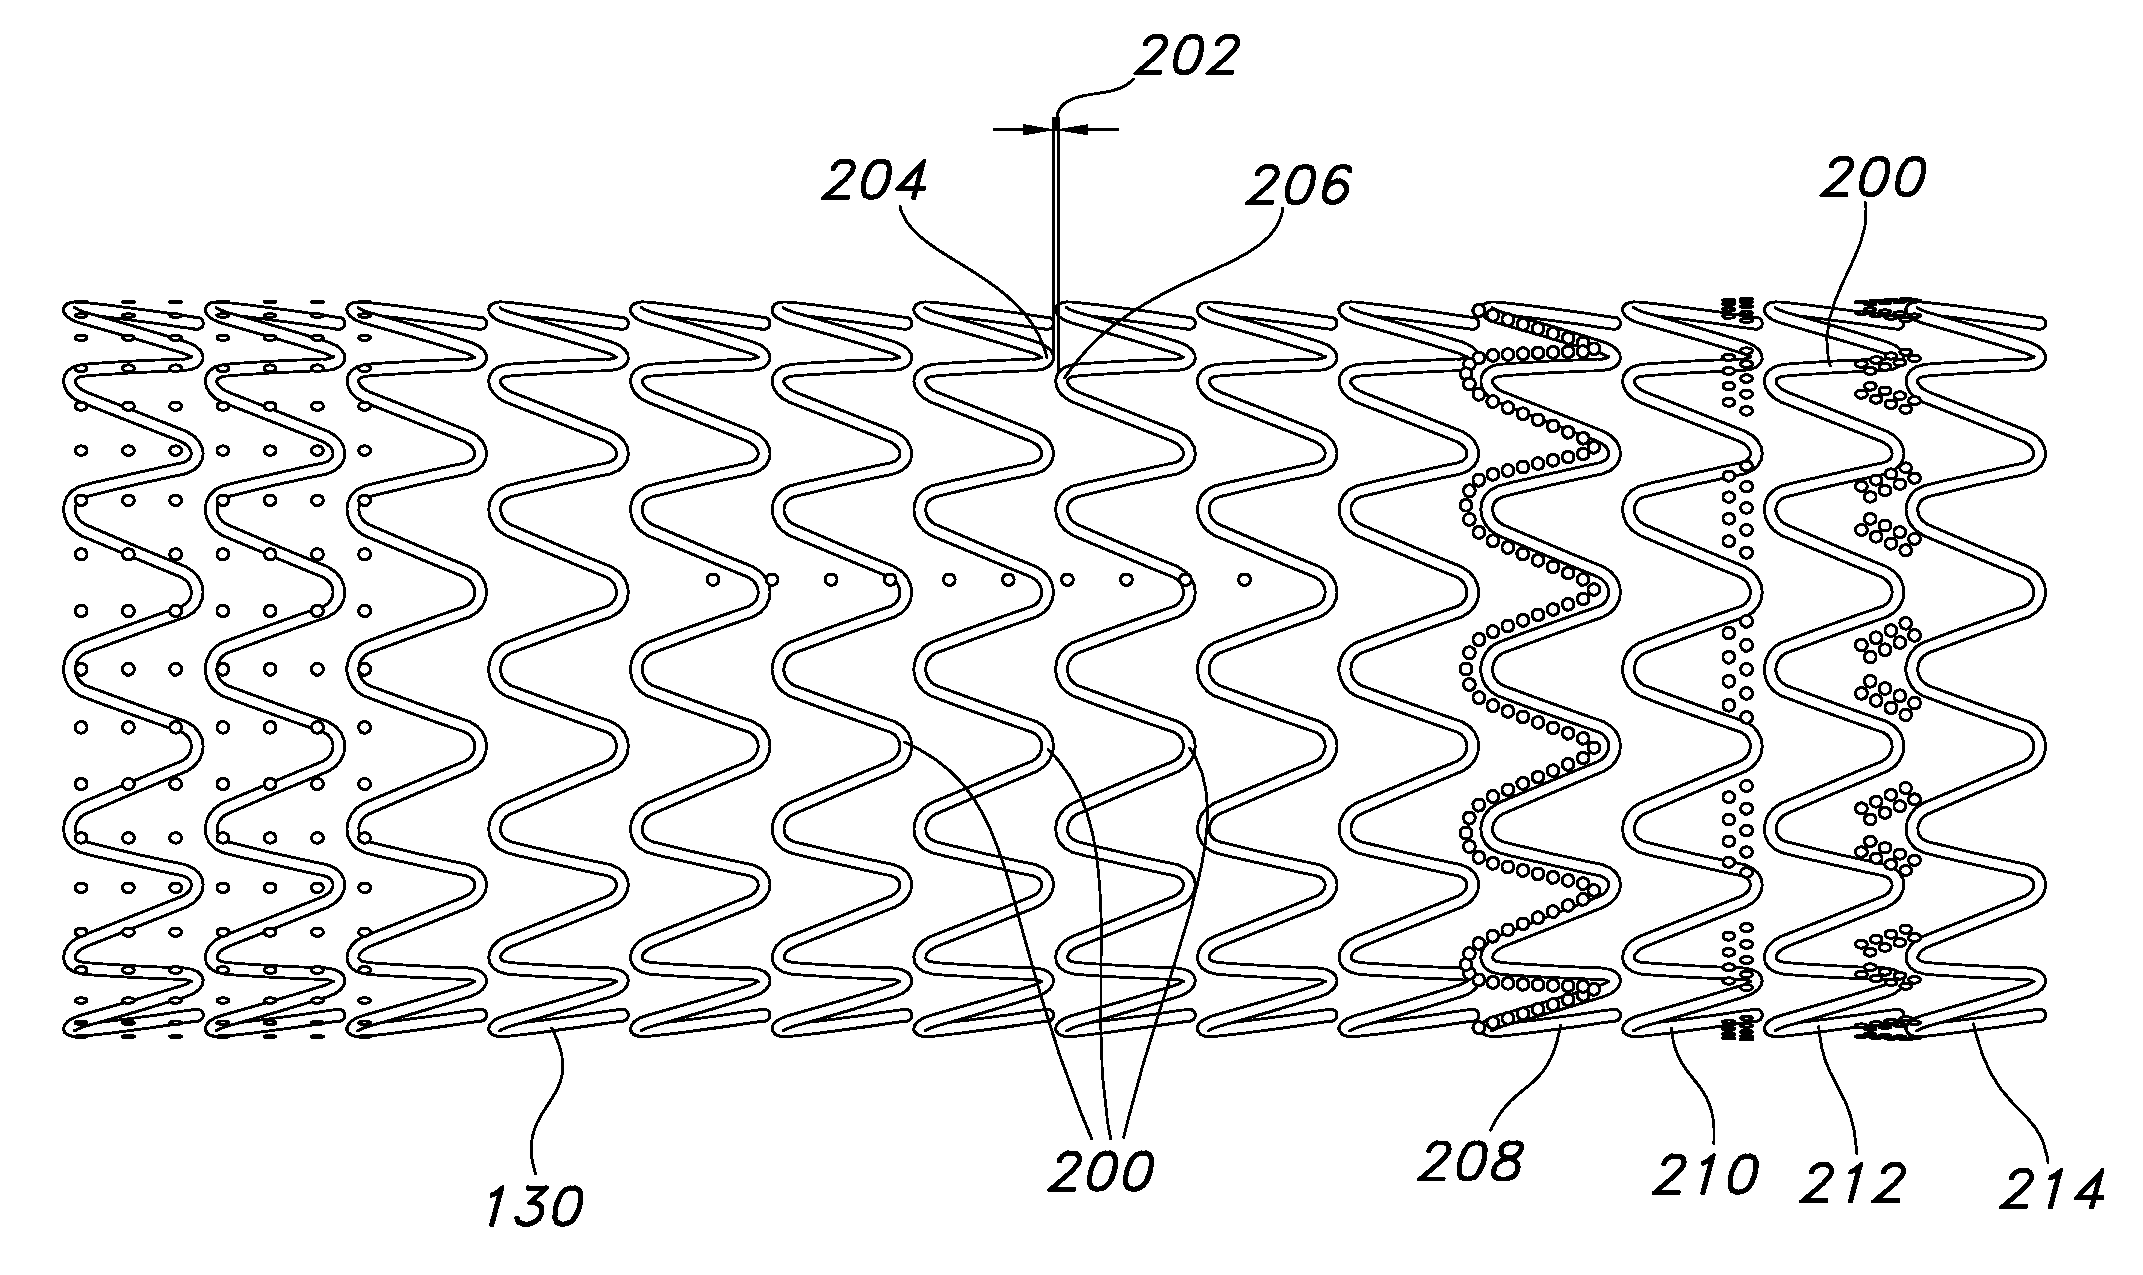 Flexible Stent-Graft Device Having Patterned Polymeric Coverings